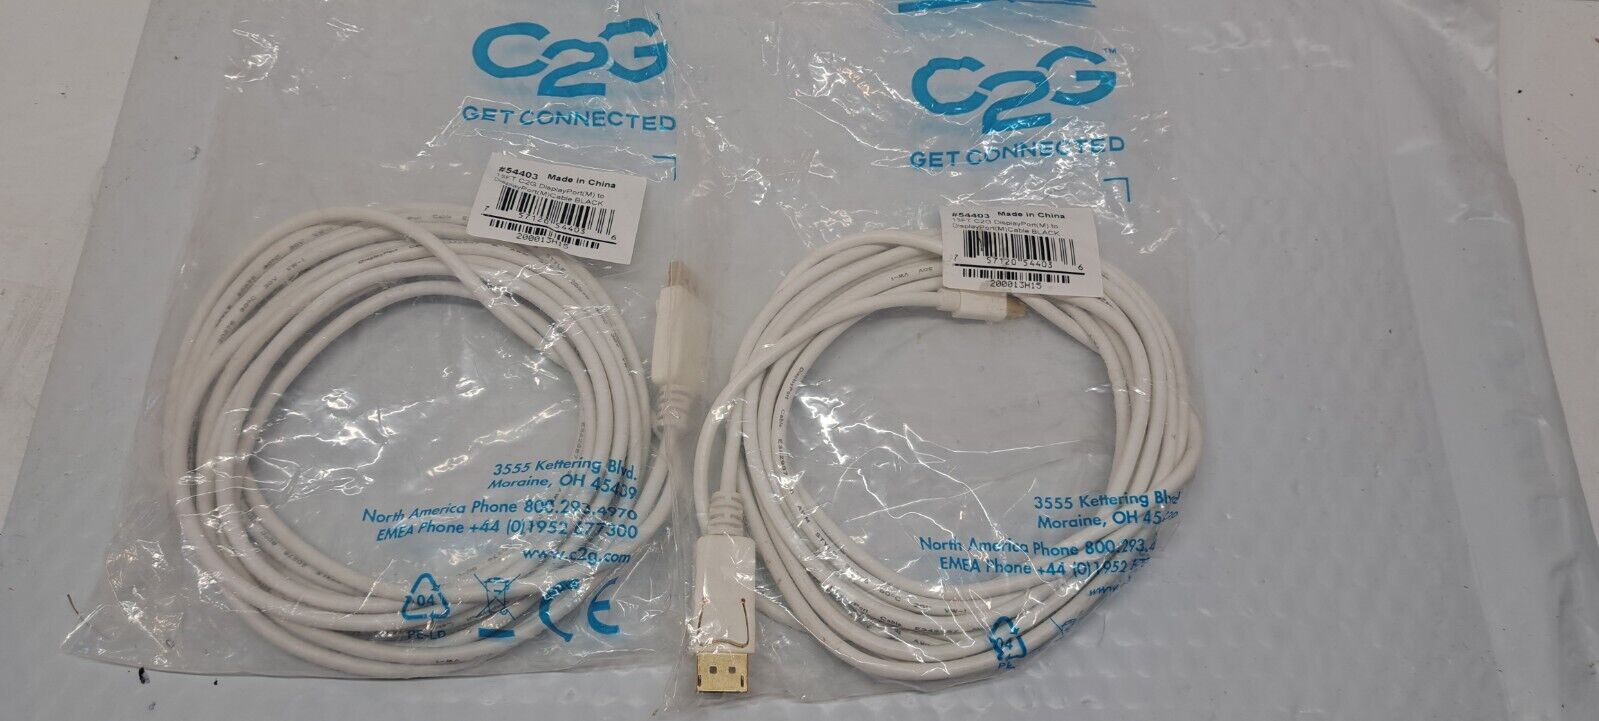 2x C2G 54403 15ft DisplayPort� Cables with Latches for PCs, Laptops, Displays